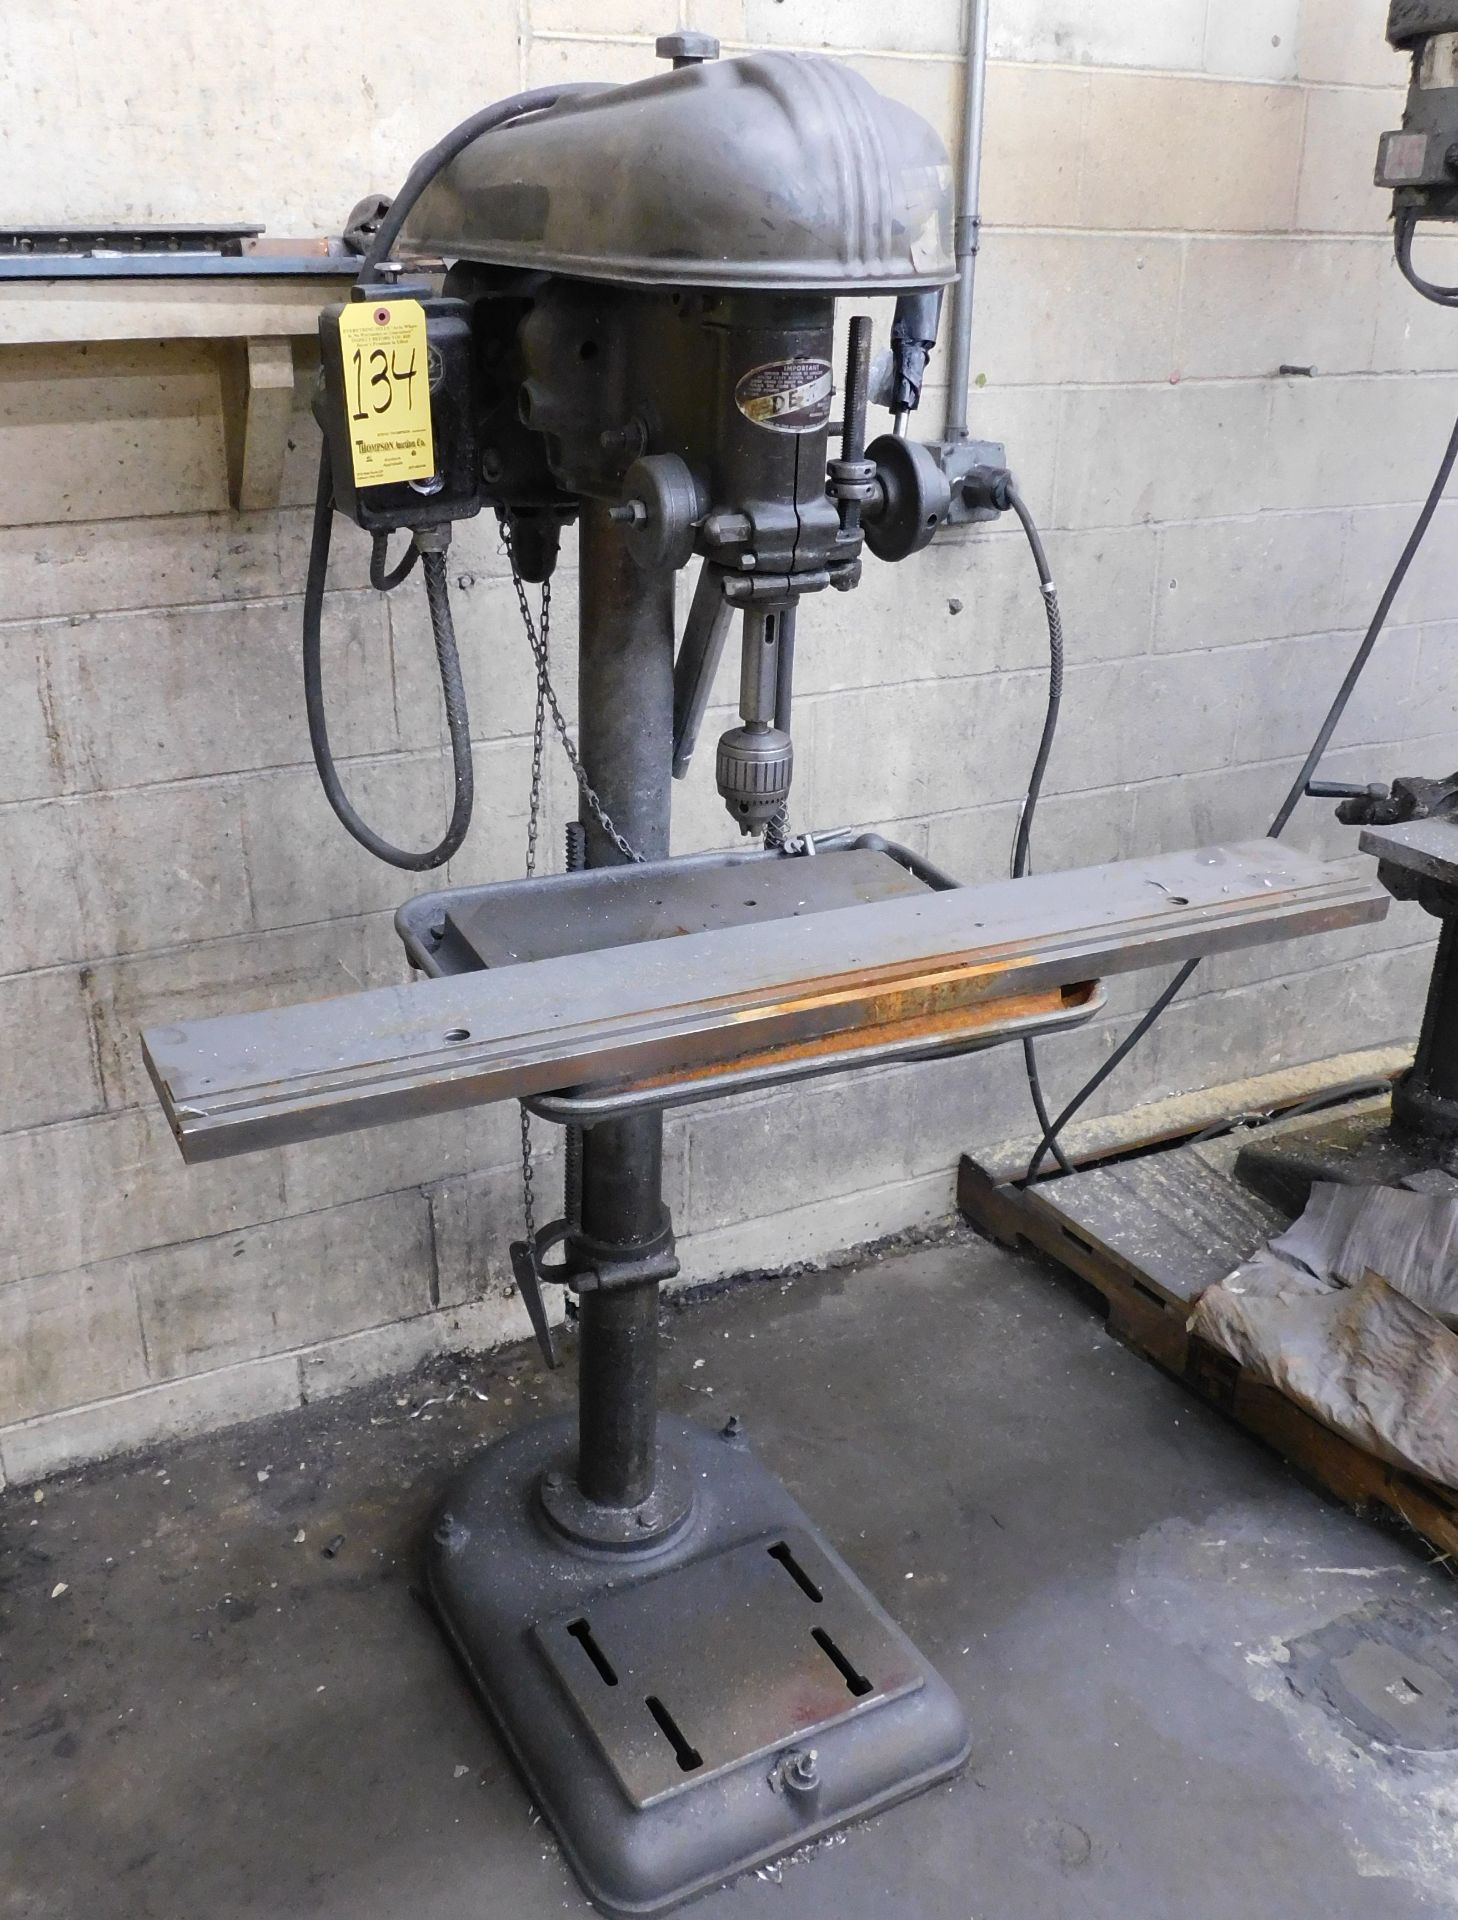 Delta Rockwell 17" Single Spindle Drill Press, s/n 53-5910